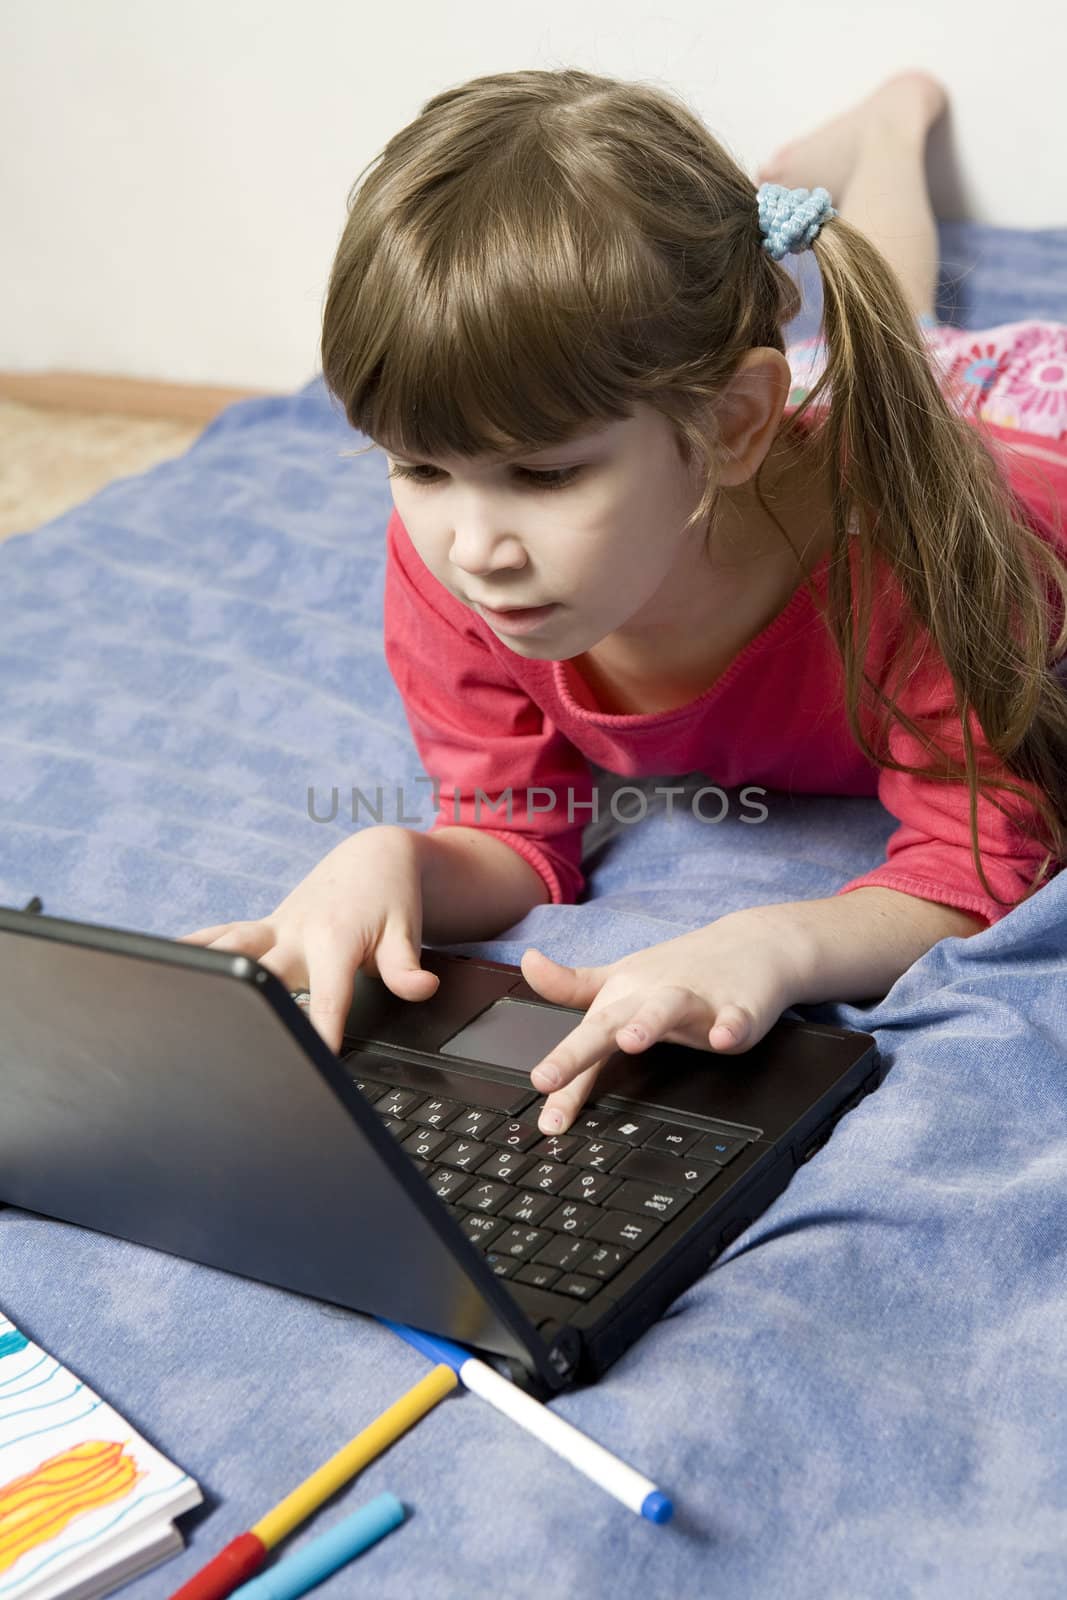 Cute little girl seven years old playing with computer